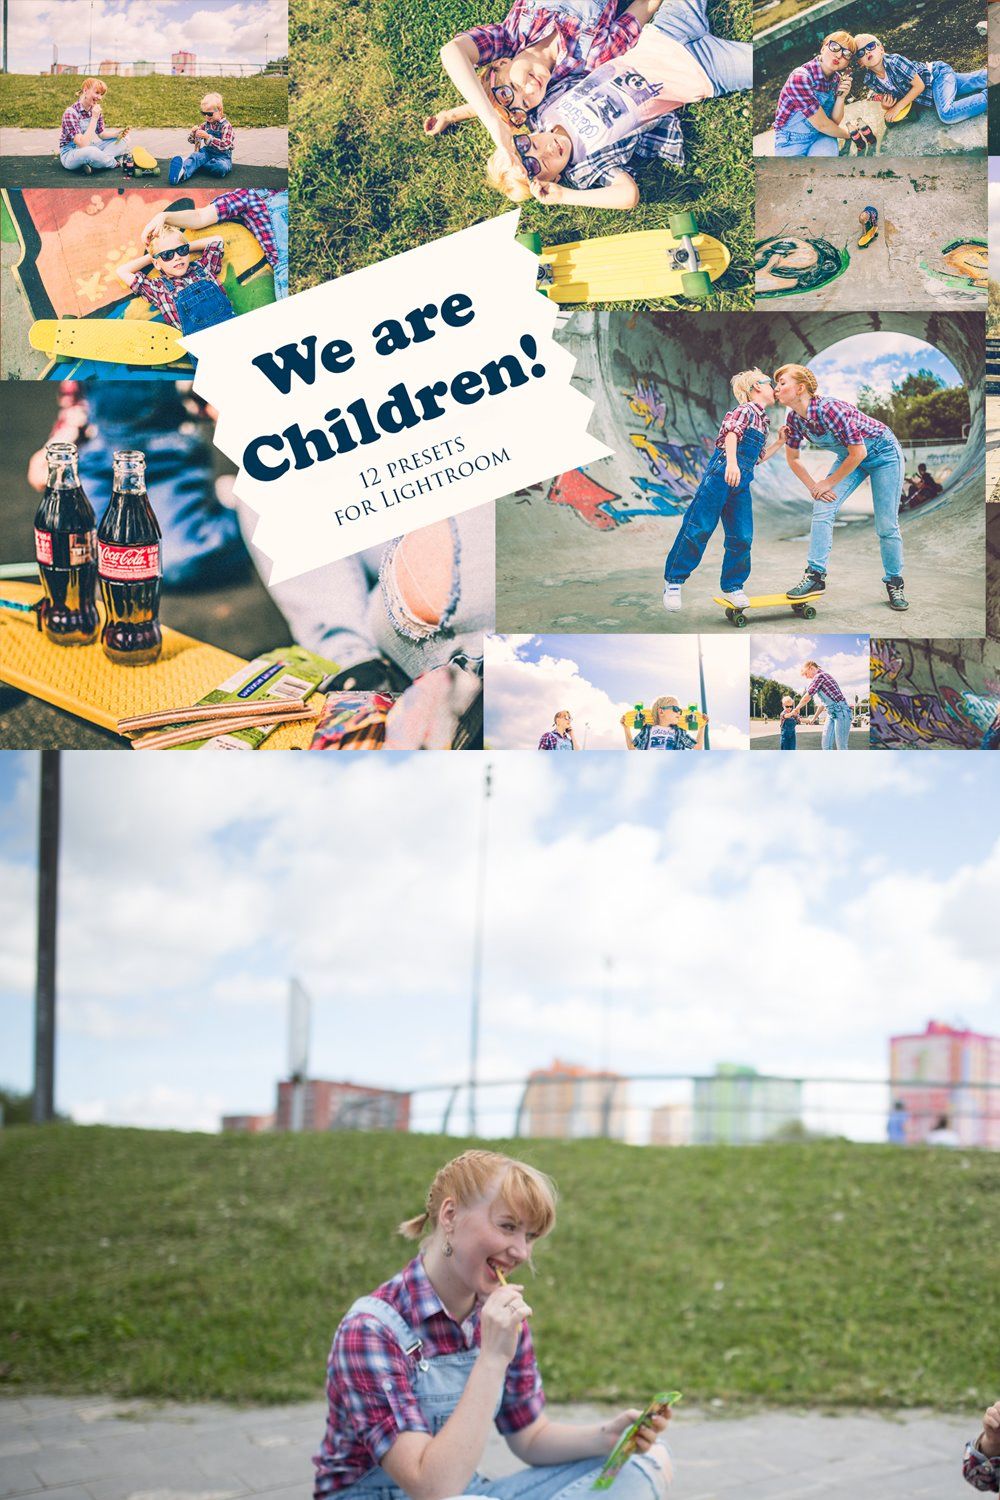 We are Children! - 12 presets for Lr pinterest preview image.